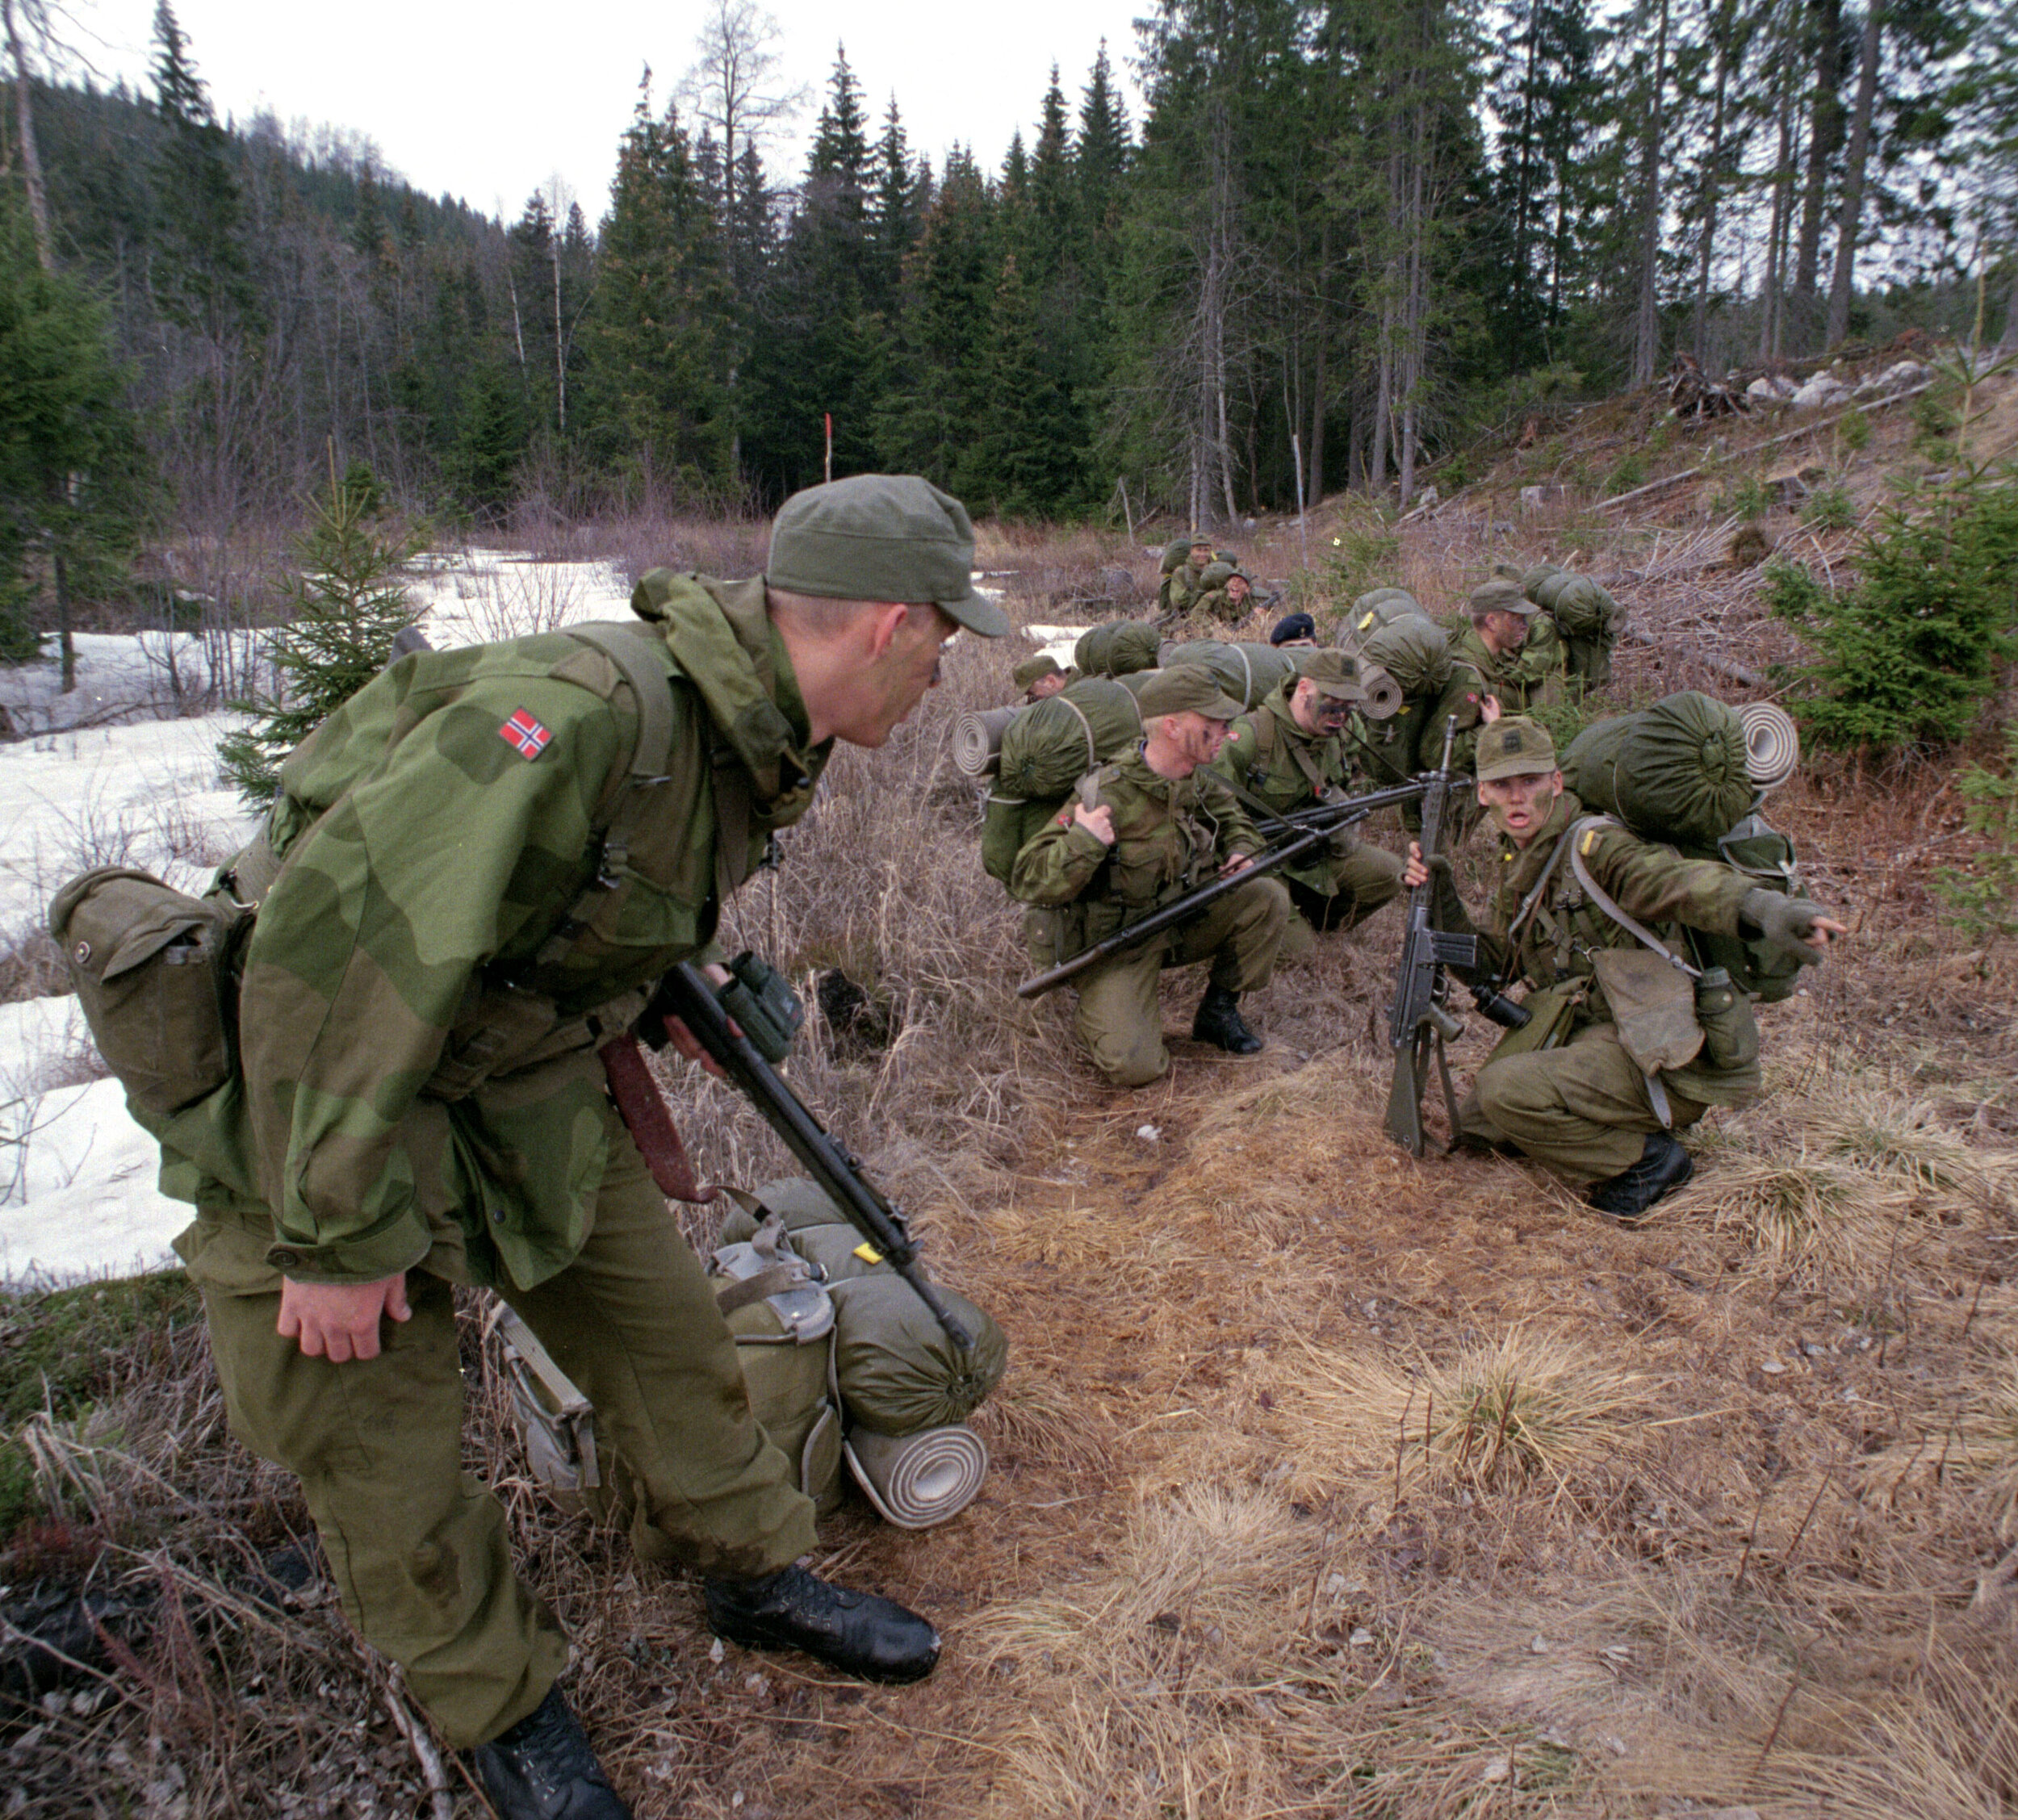  Norwegian King’s Guard on an exercise  